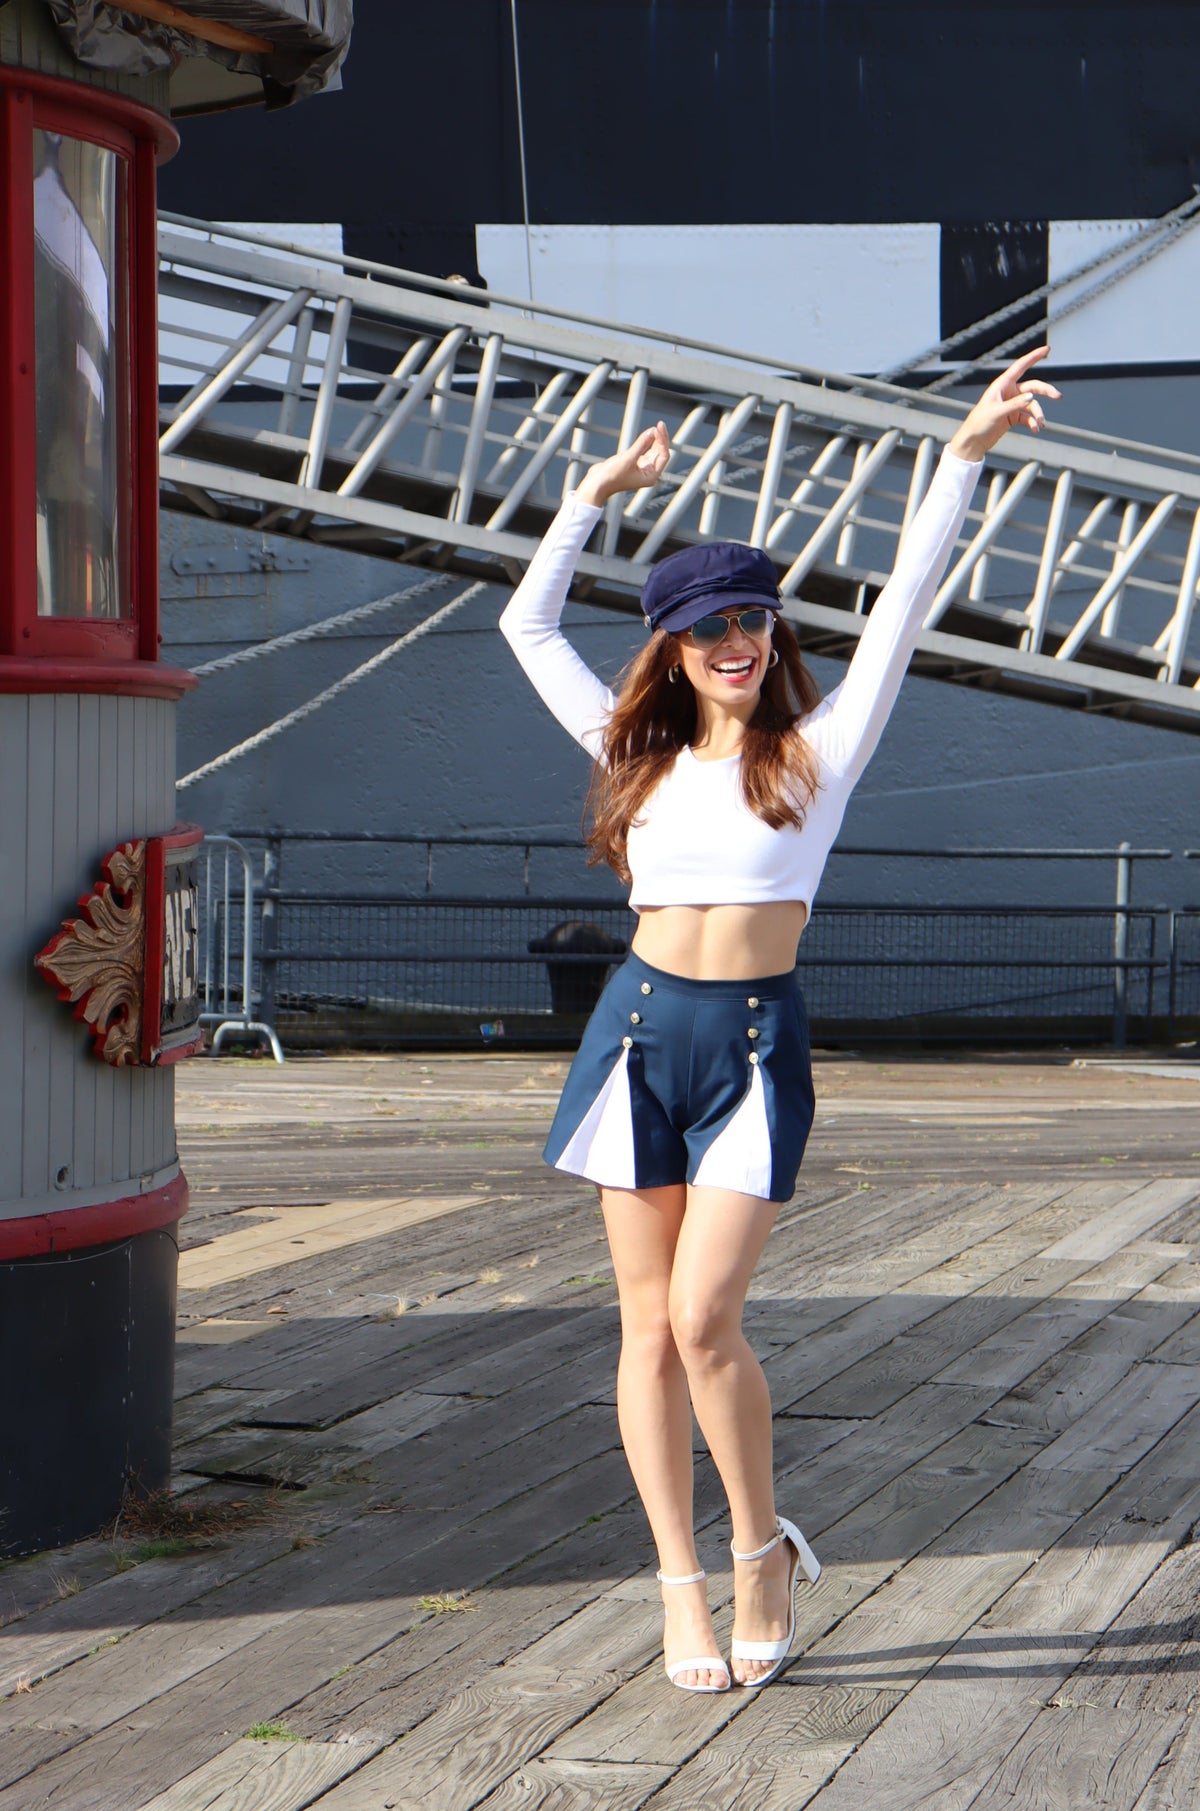 Model wearing scoop neck long sleeve white crop top and blue and white spinnaker shorts with her arms in the air smiling.